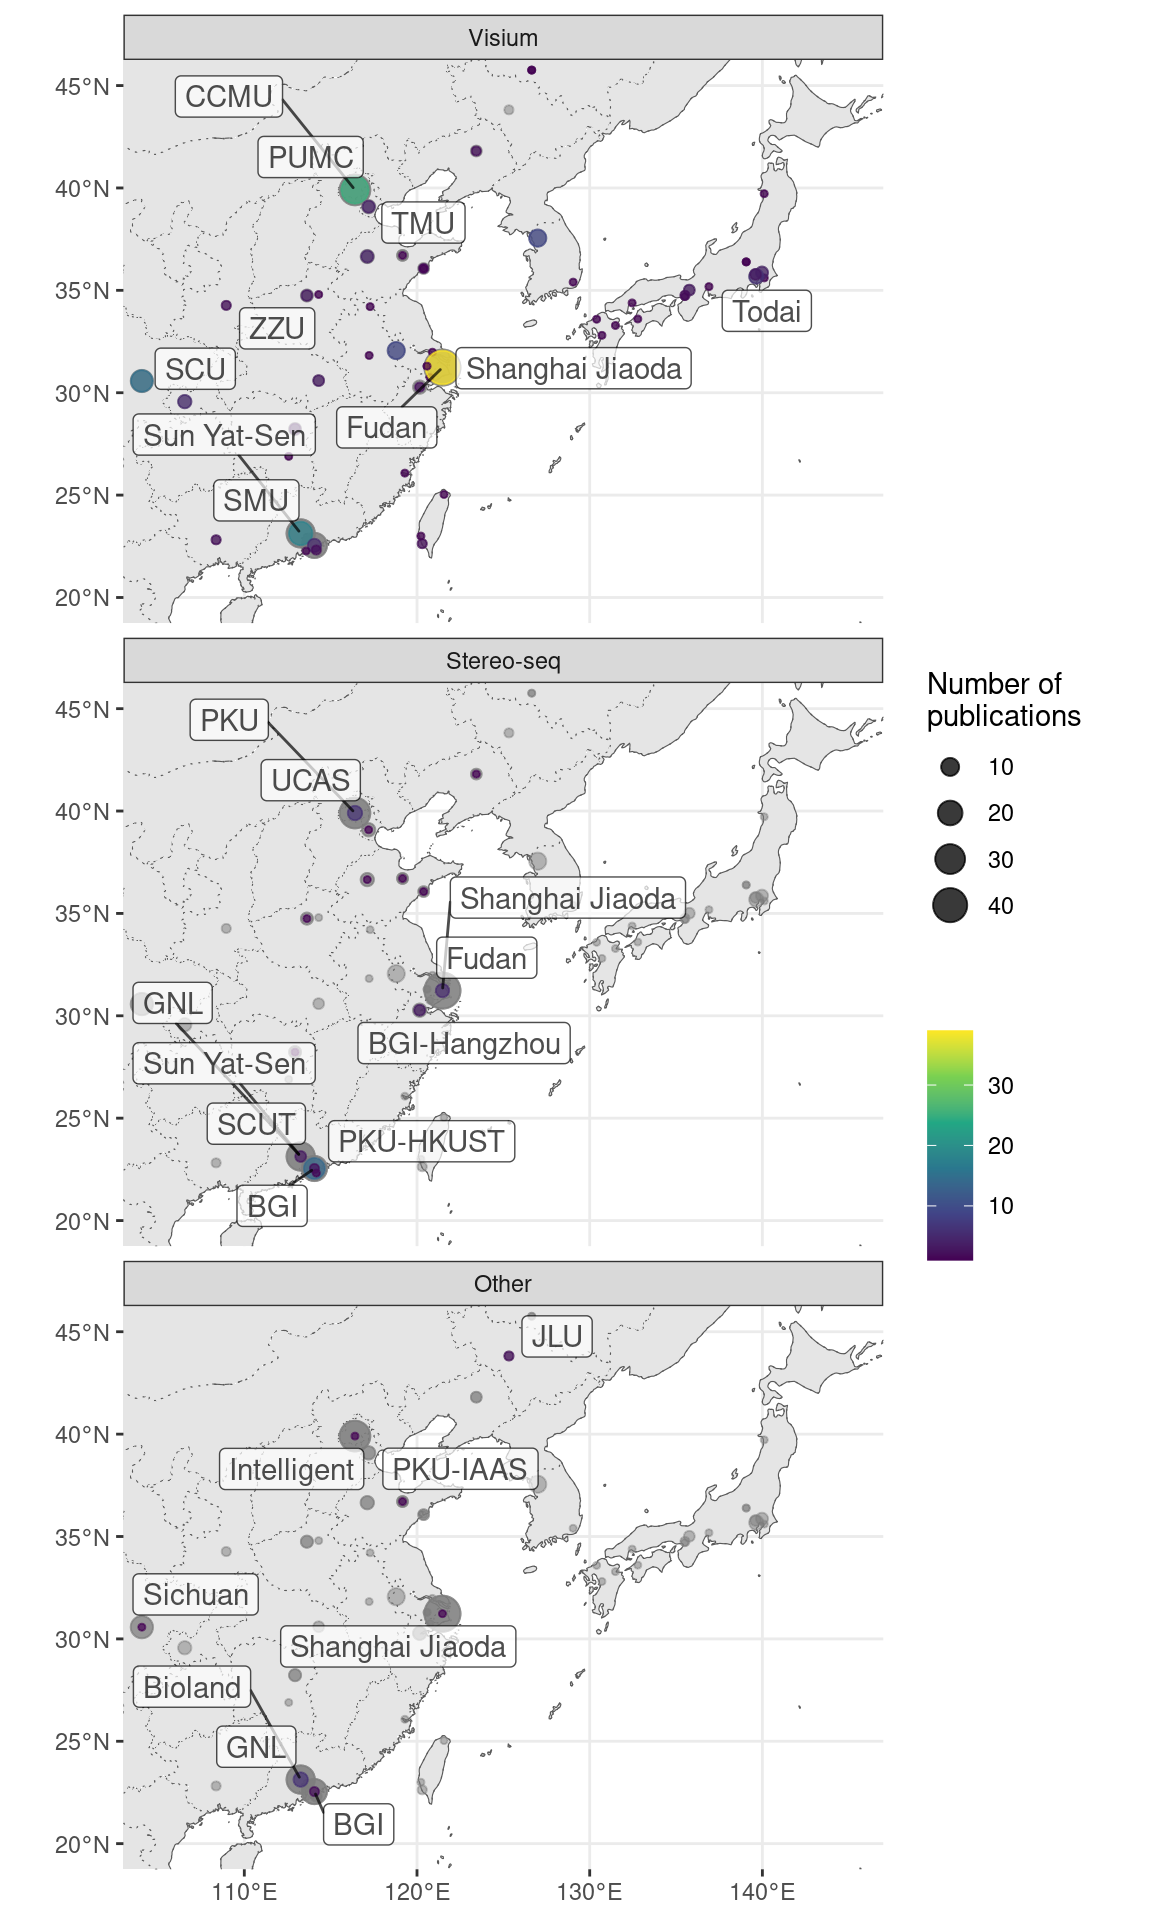 Cities and institutions using the two most popular tehcnologies in Northeast Asia. Preprints are included.